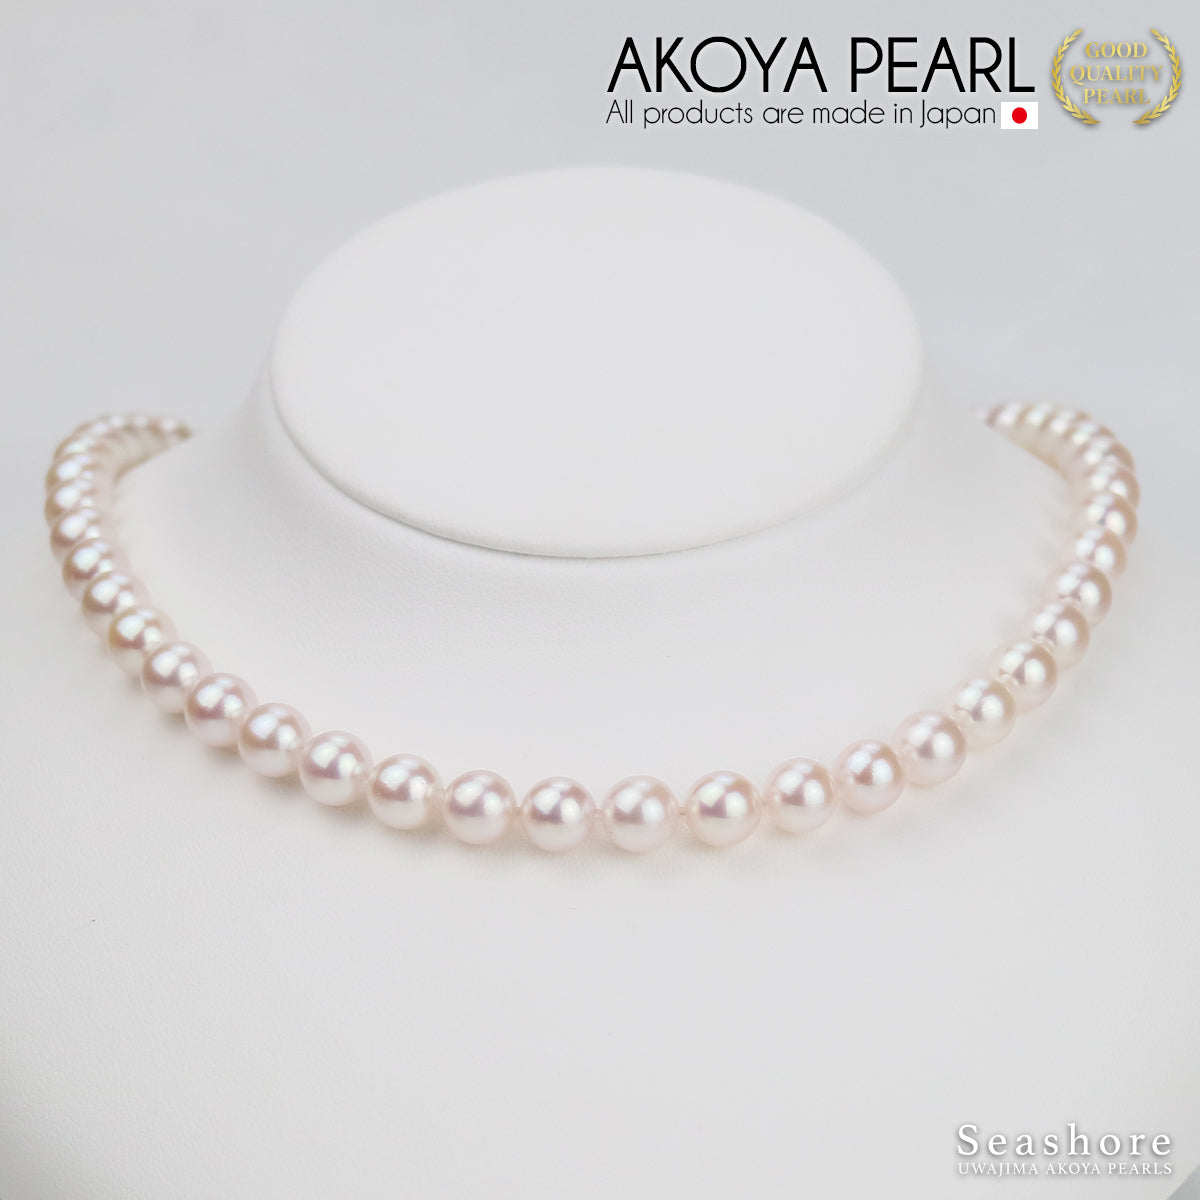 Akoya Pearl Formal Necklace Set of 2 [7.5-8.0mm] (Earrings included) Regular Size Formal Set with Certificate of Authenticity and Storage Case